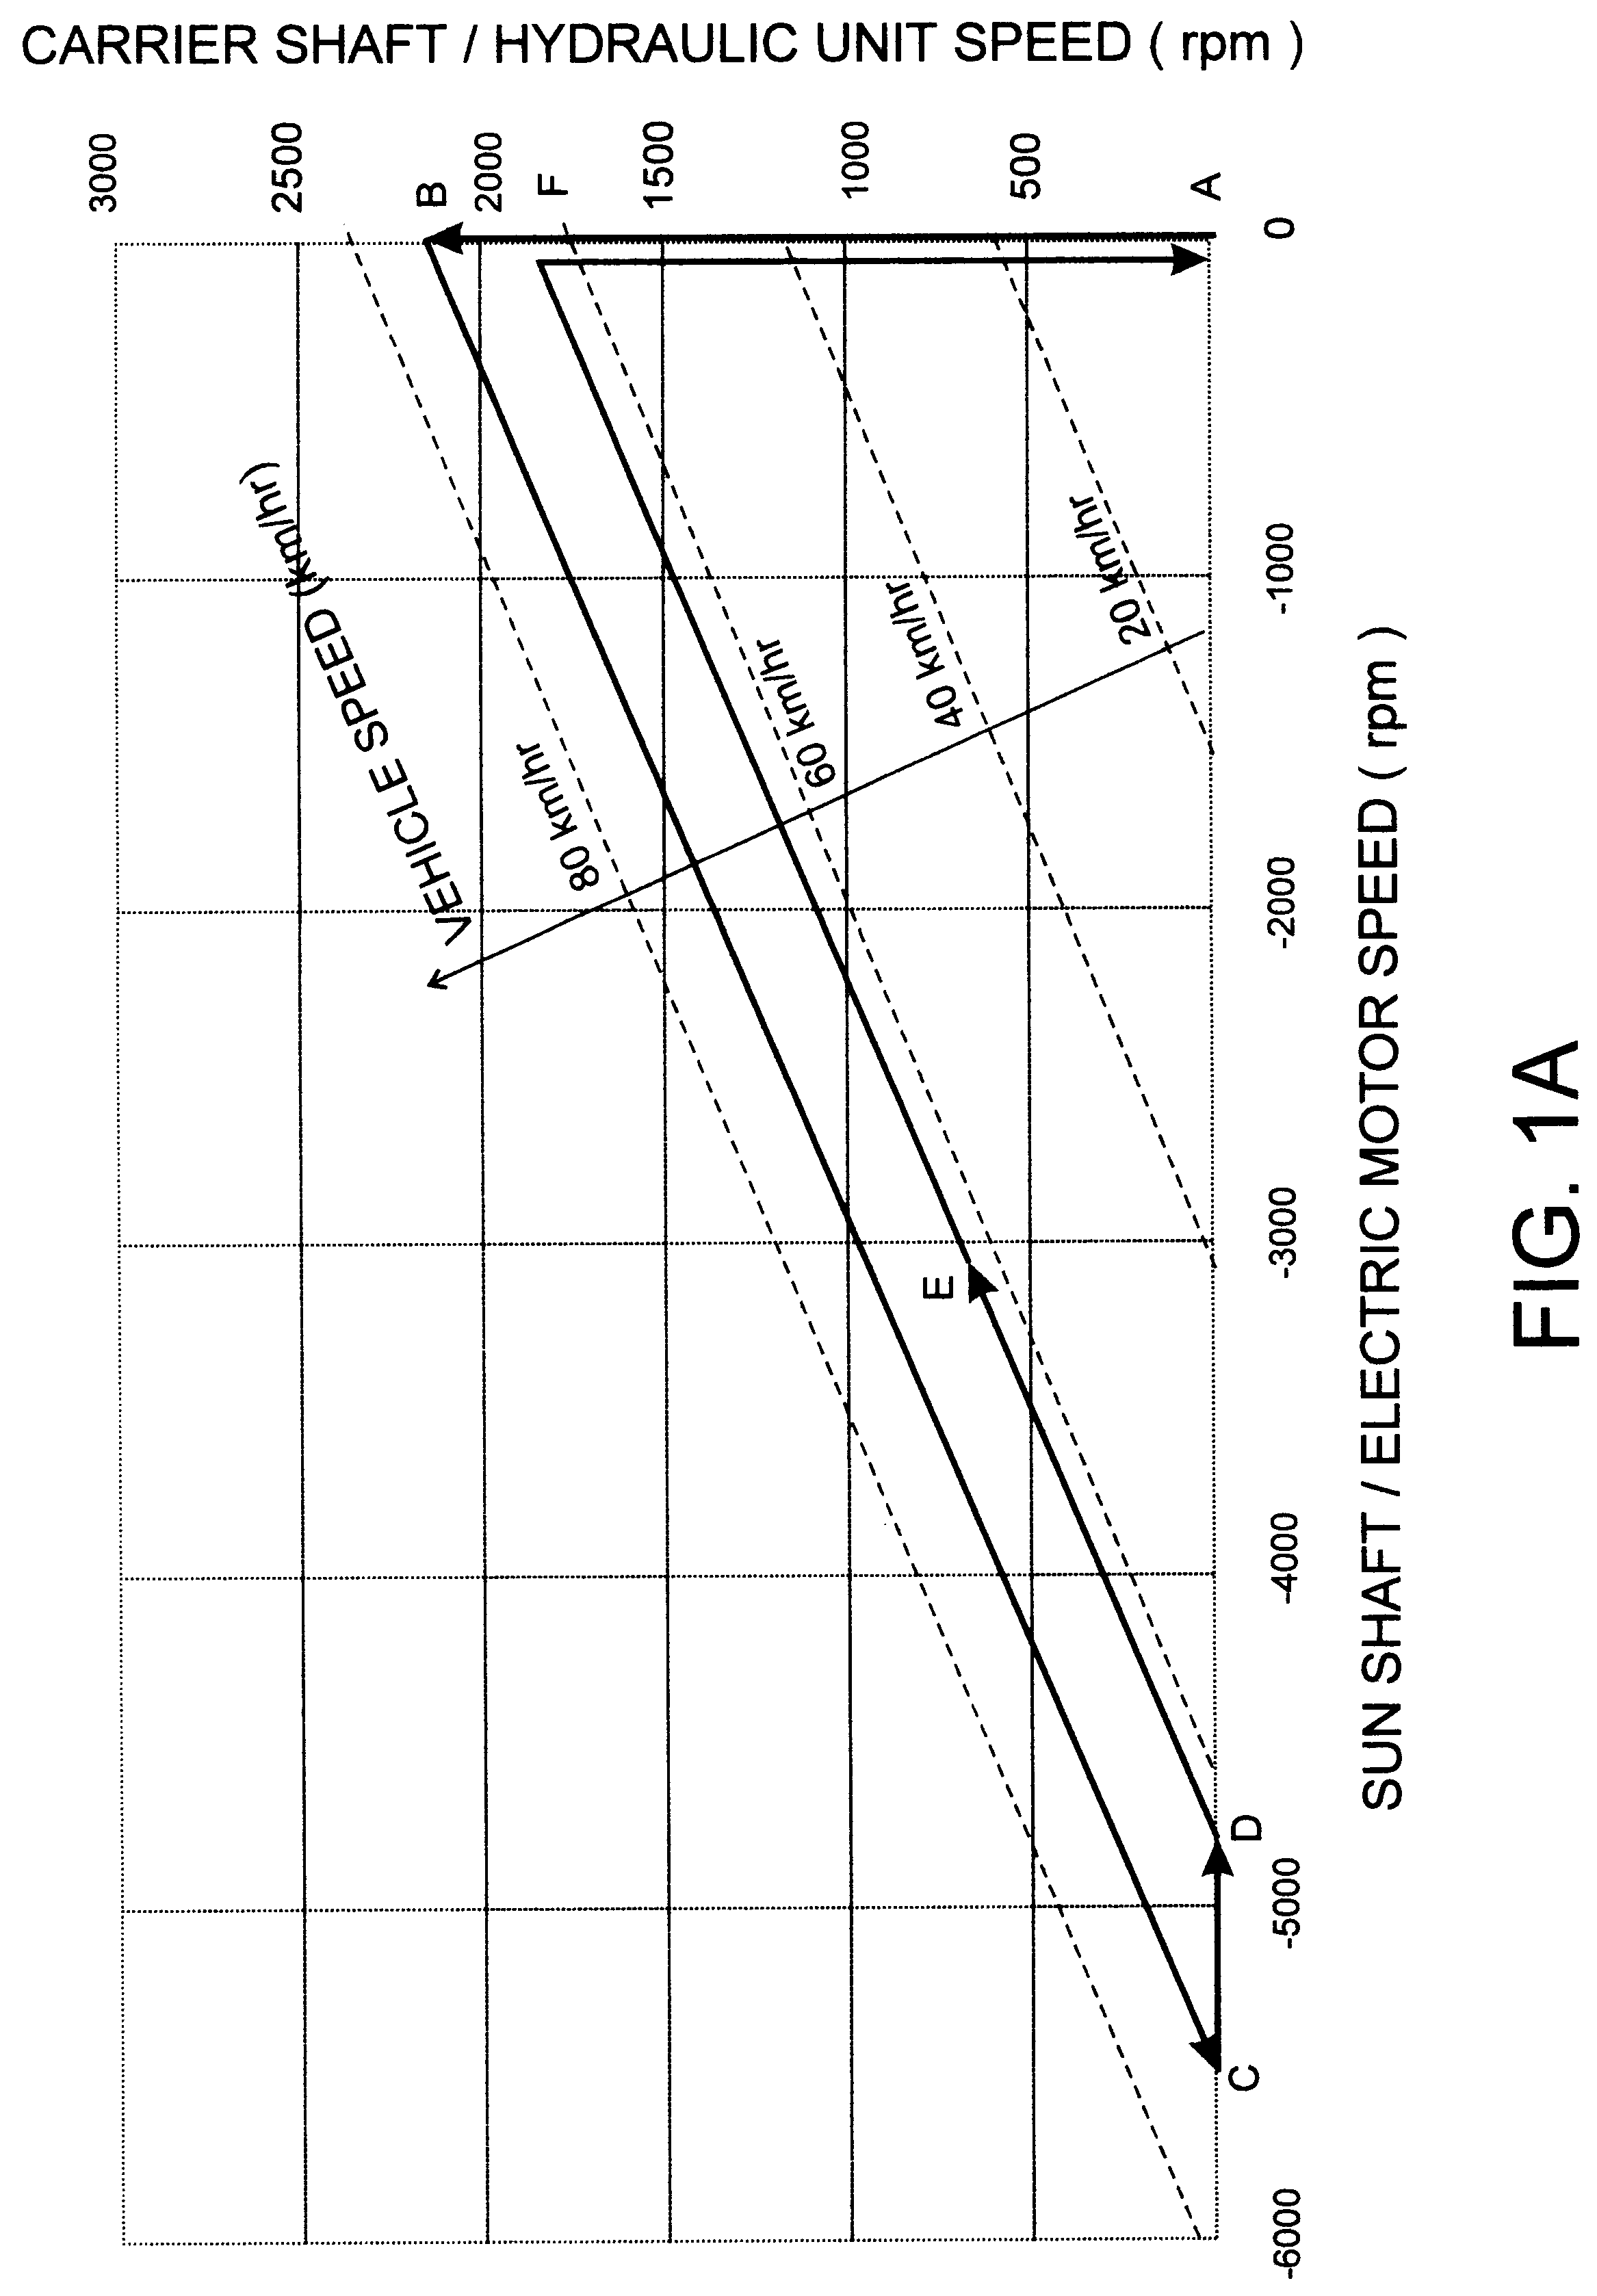 Hybrid propulsion system for road vehicles